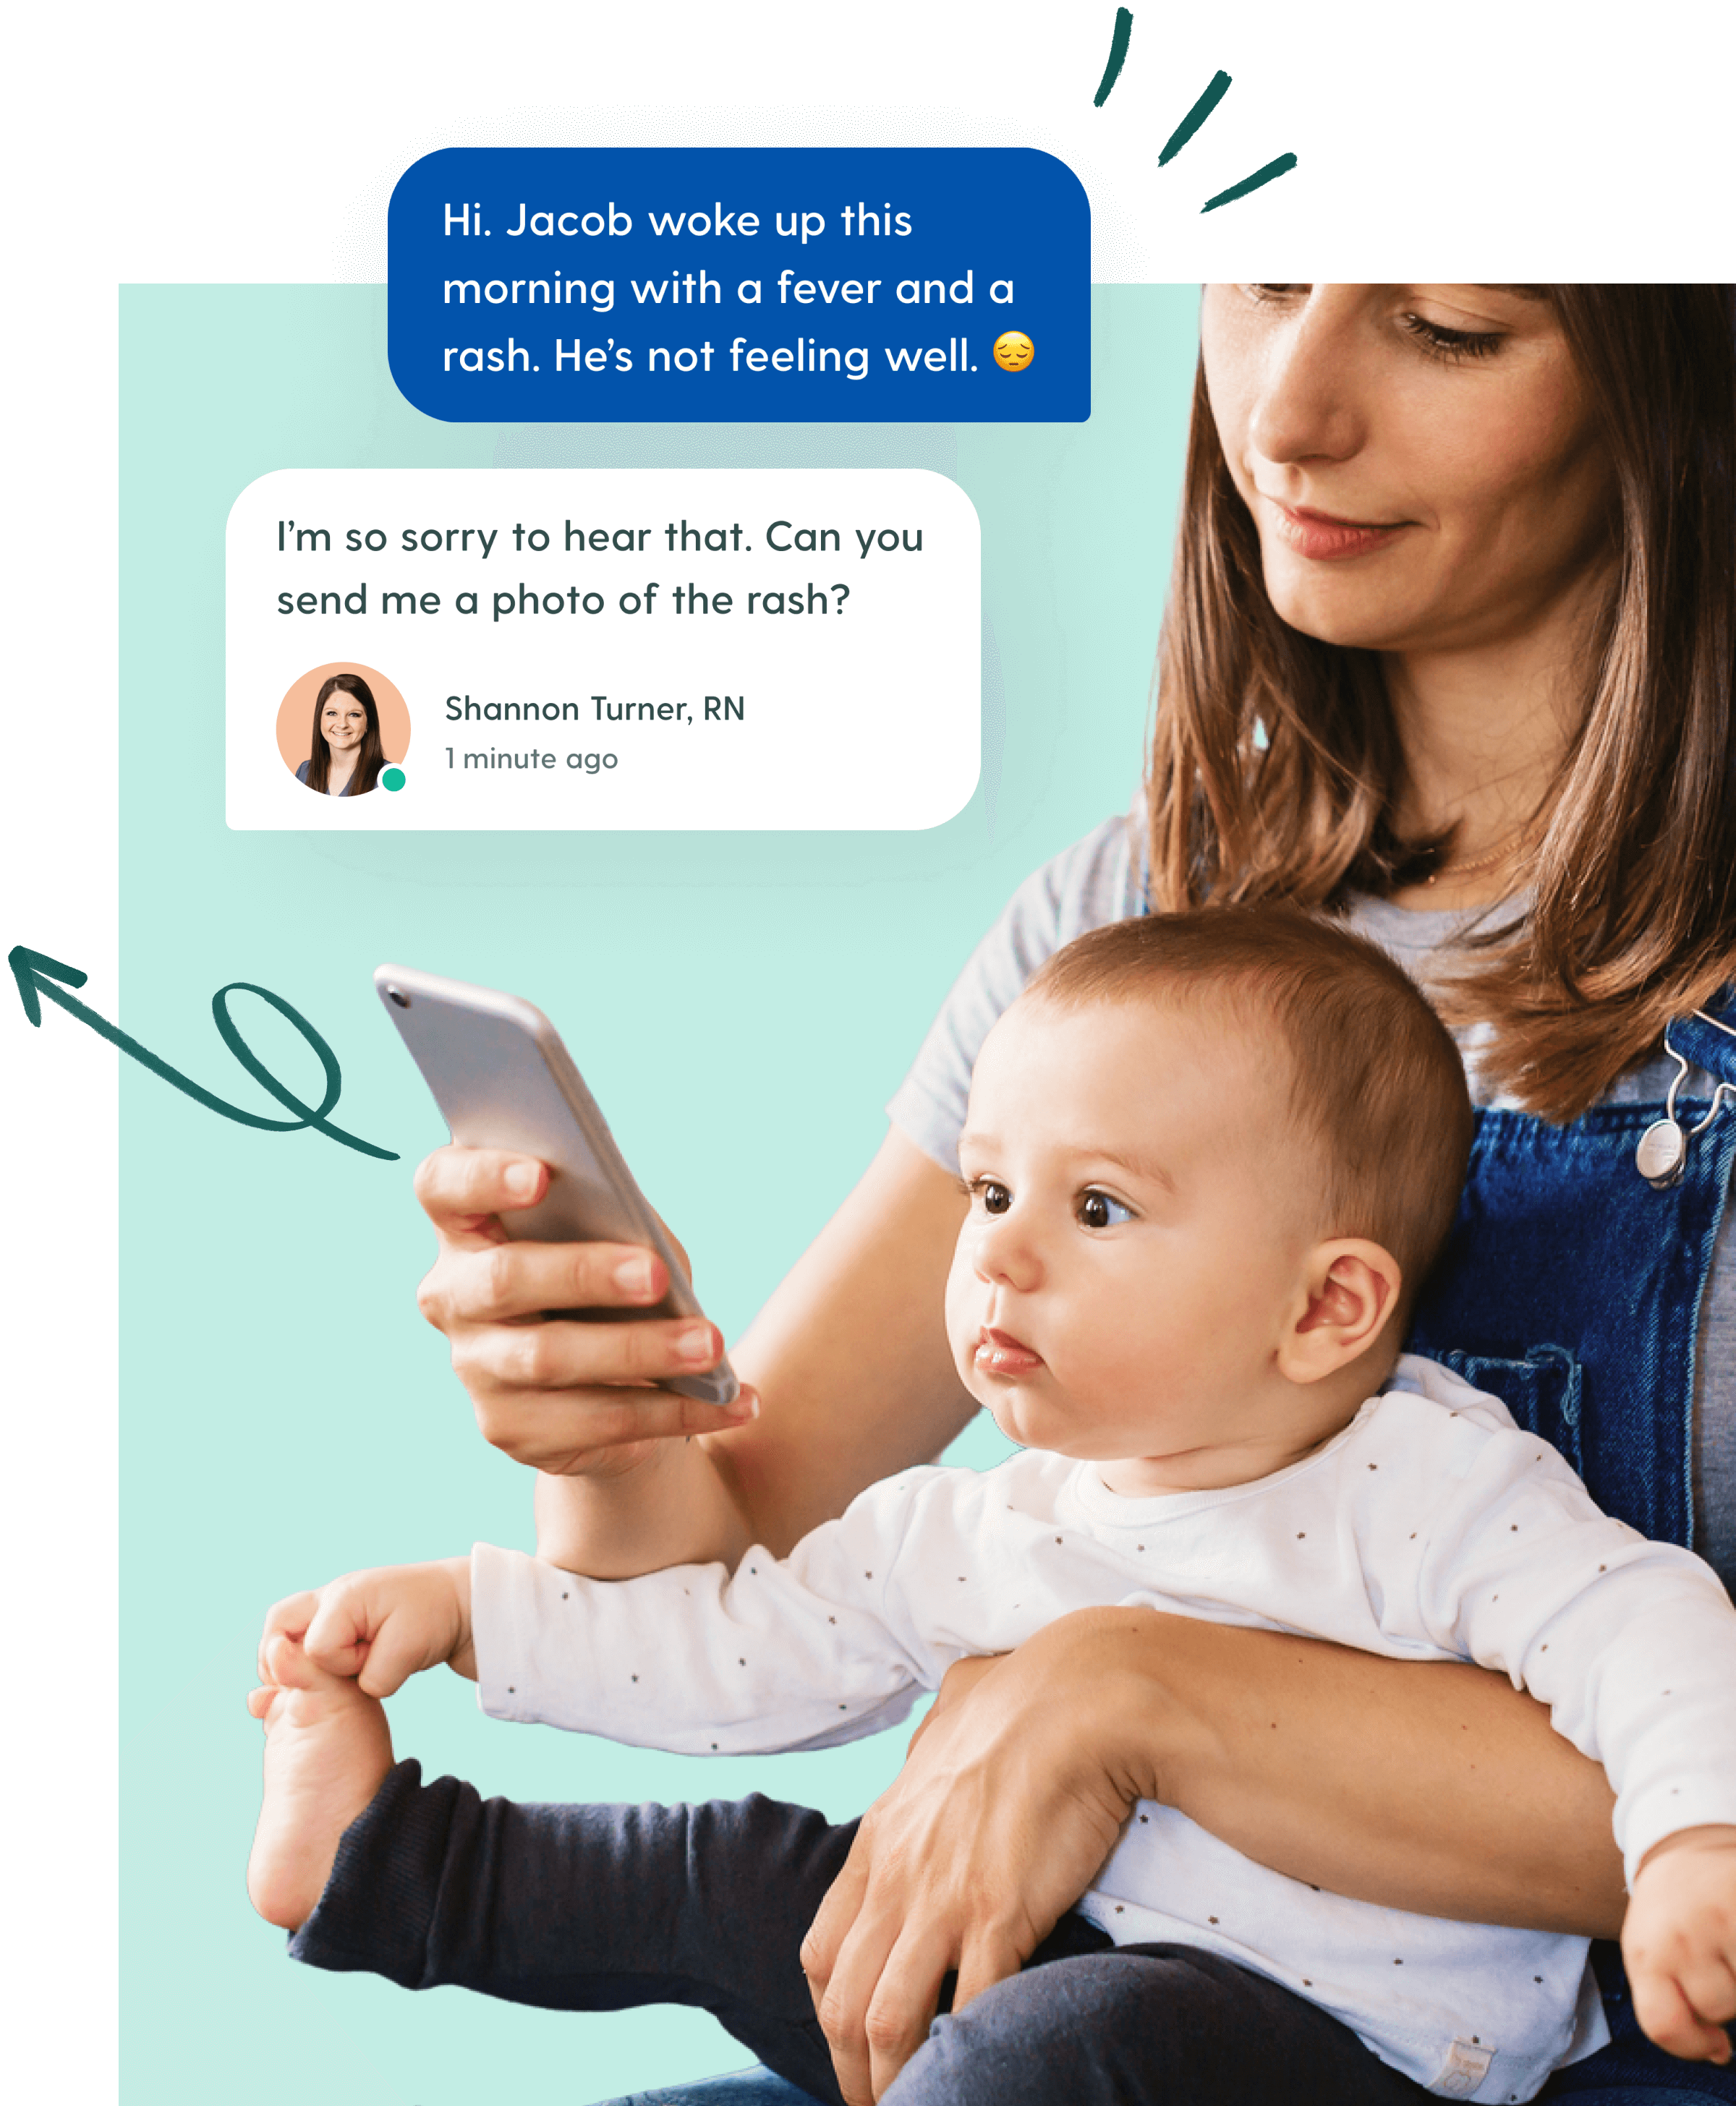 Image of mother holding a baby, both looking at a mobile device, with graphics of a chat exchange between the mother and a Brave Care provider about the baby's symptoms